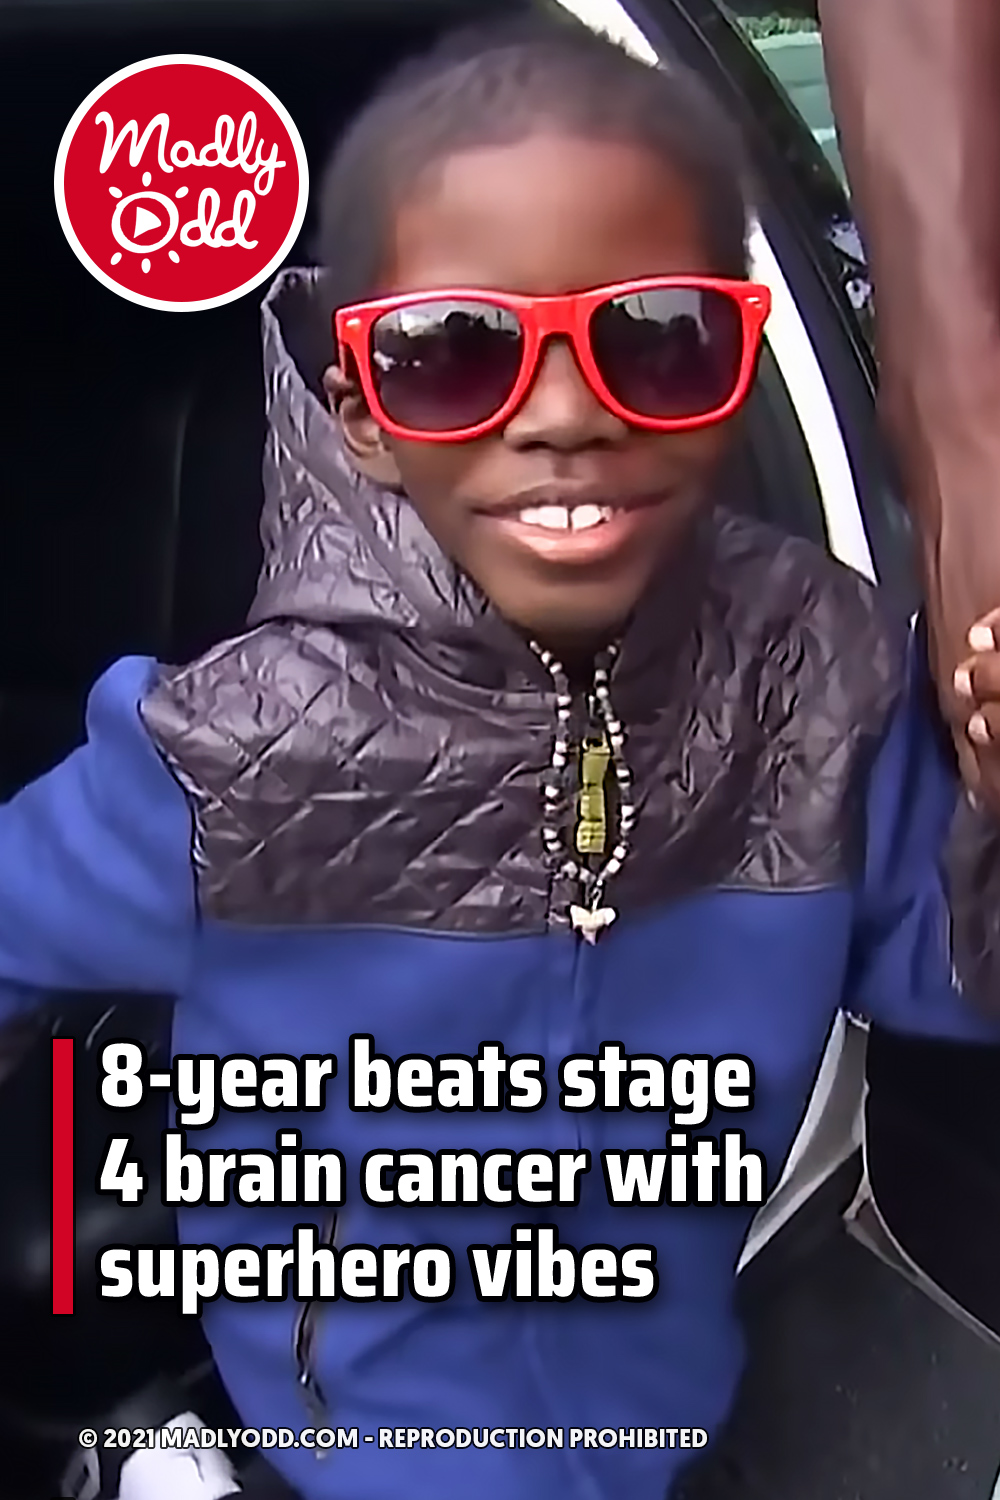 8-year beats stage 4 brain cancer with superhero vibes